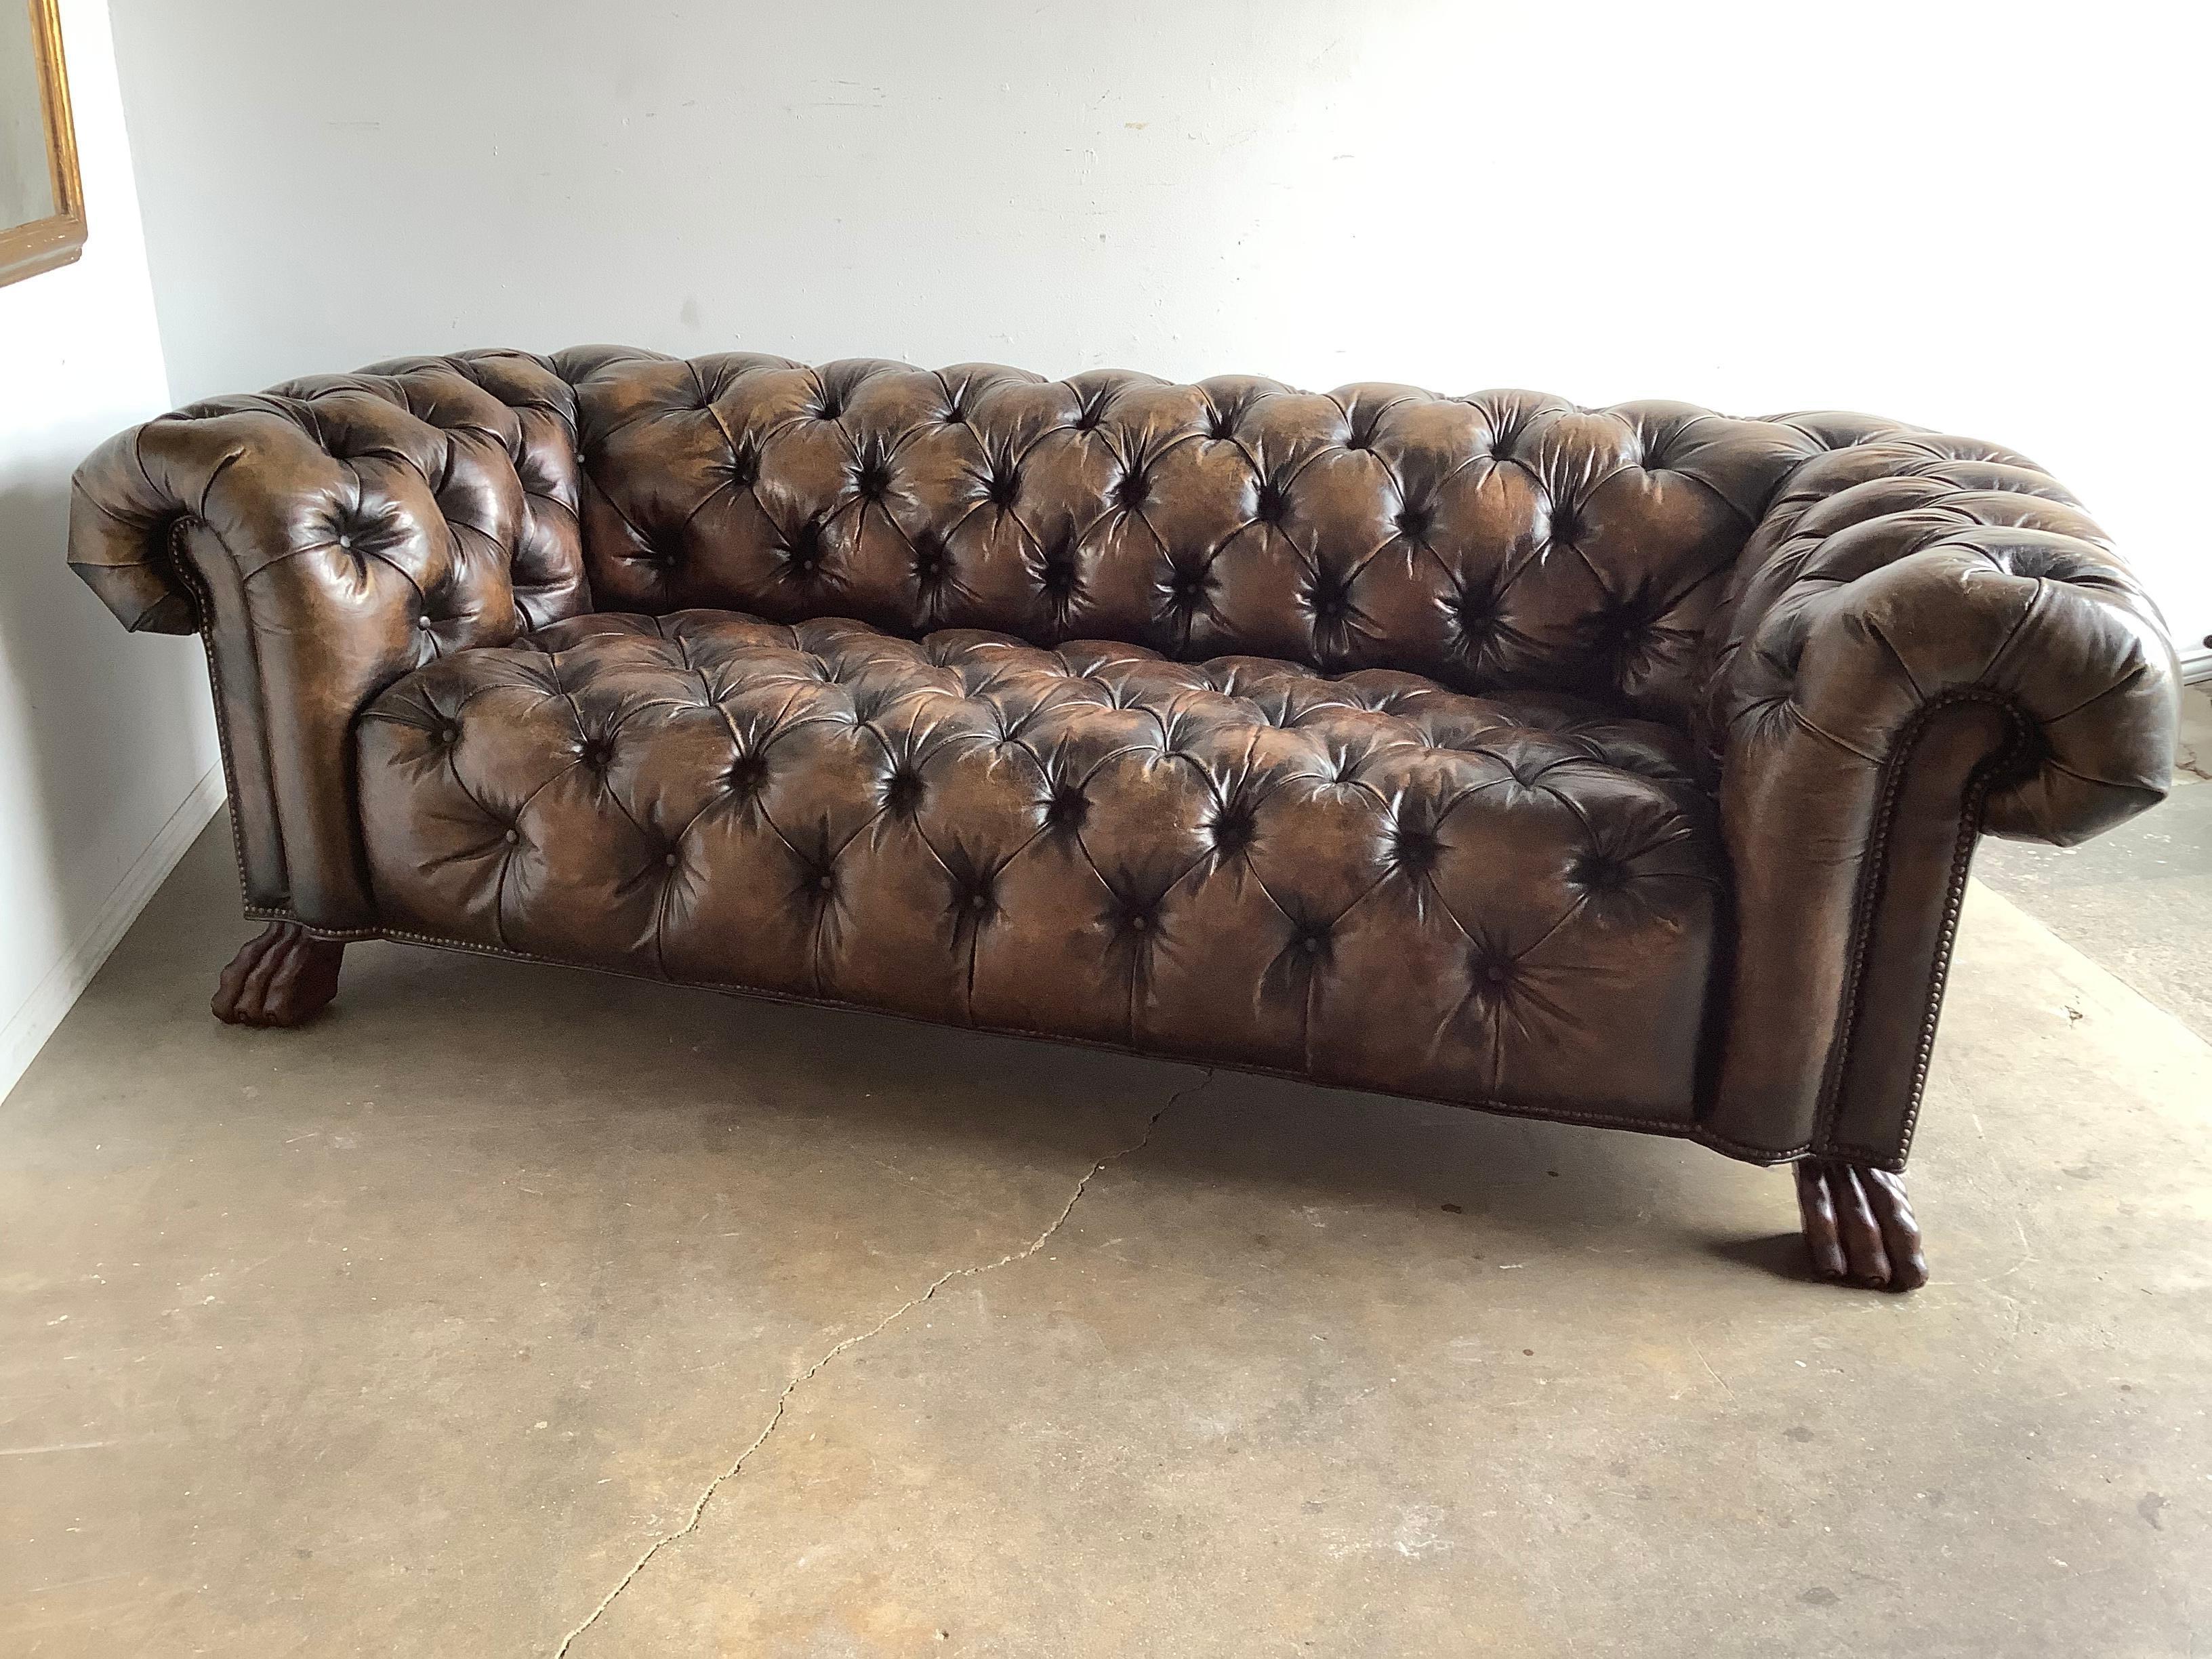 1930’s English Leather Chesterfield Style Sofa with Lion’s Paw Feet 5